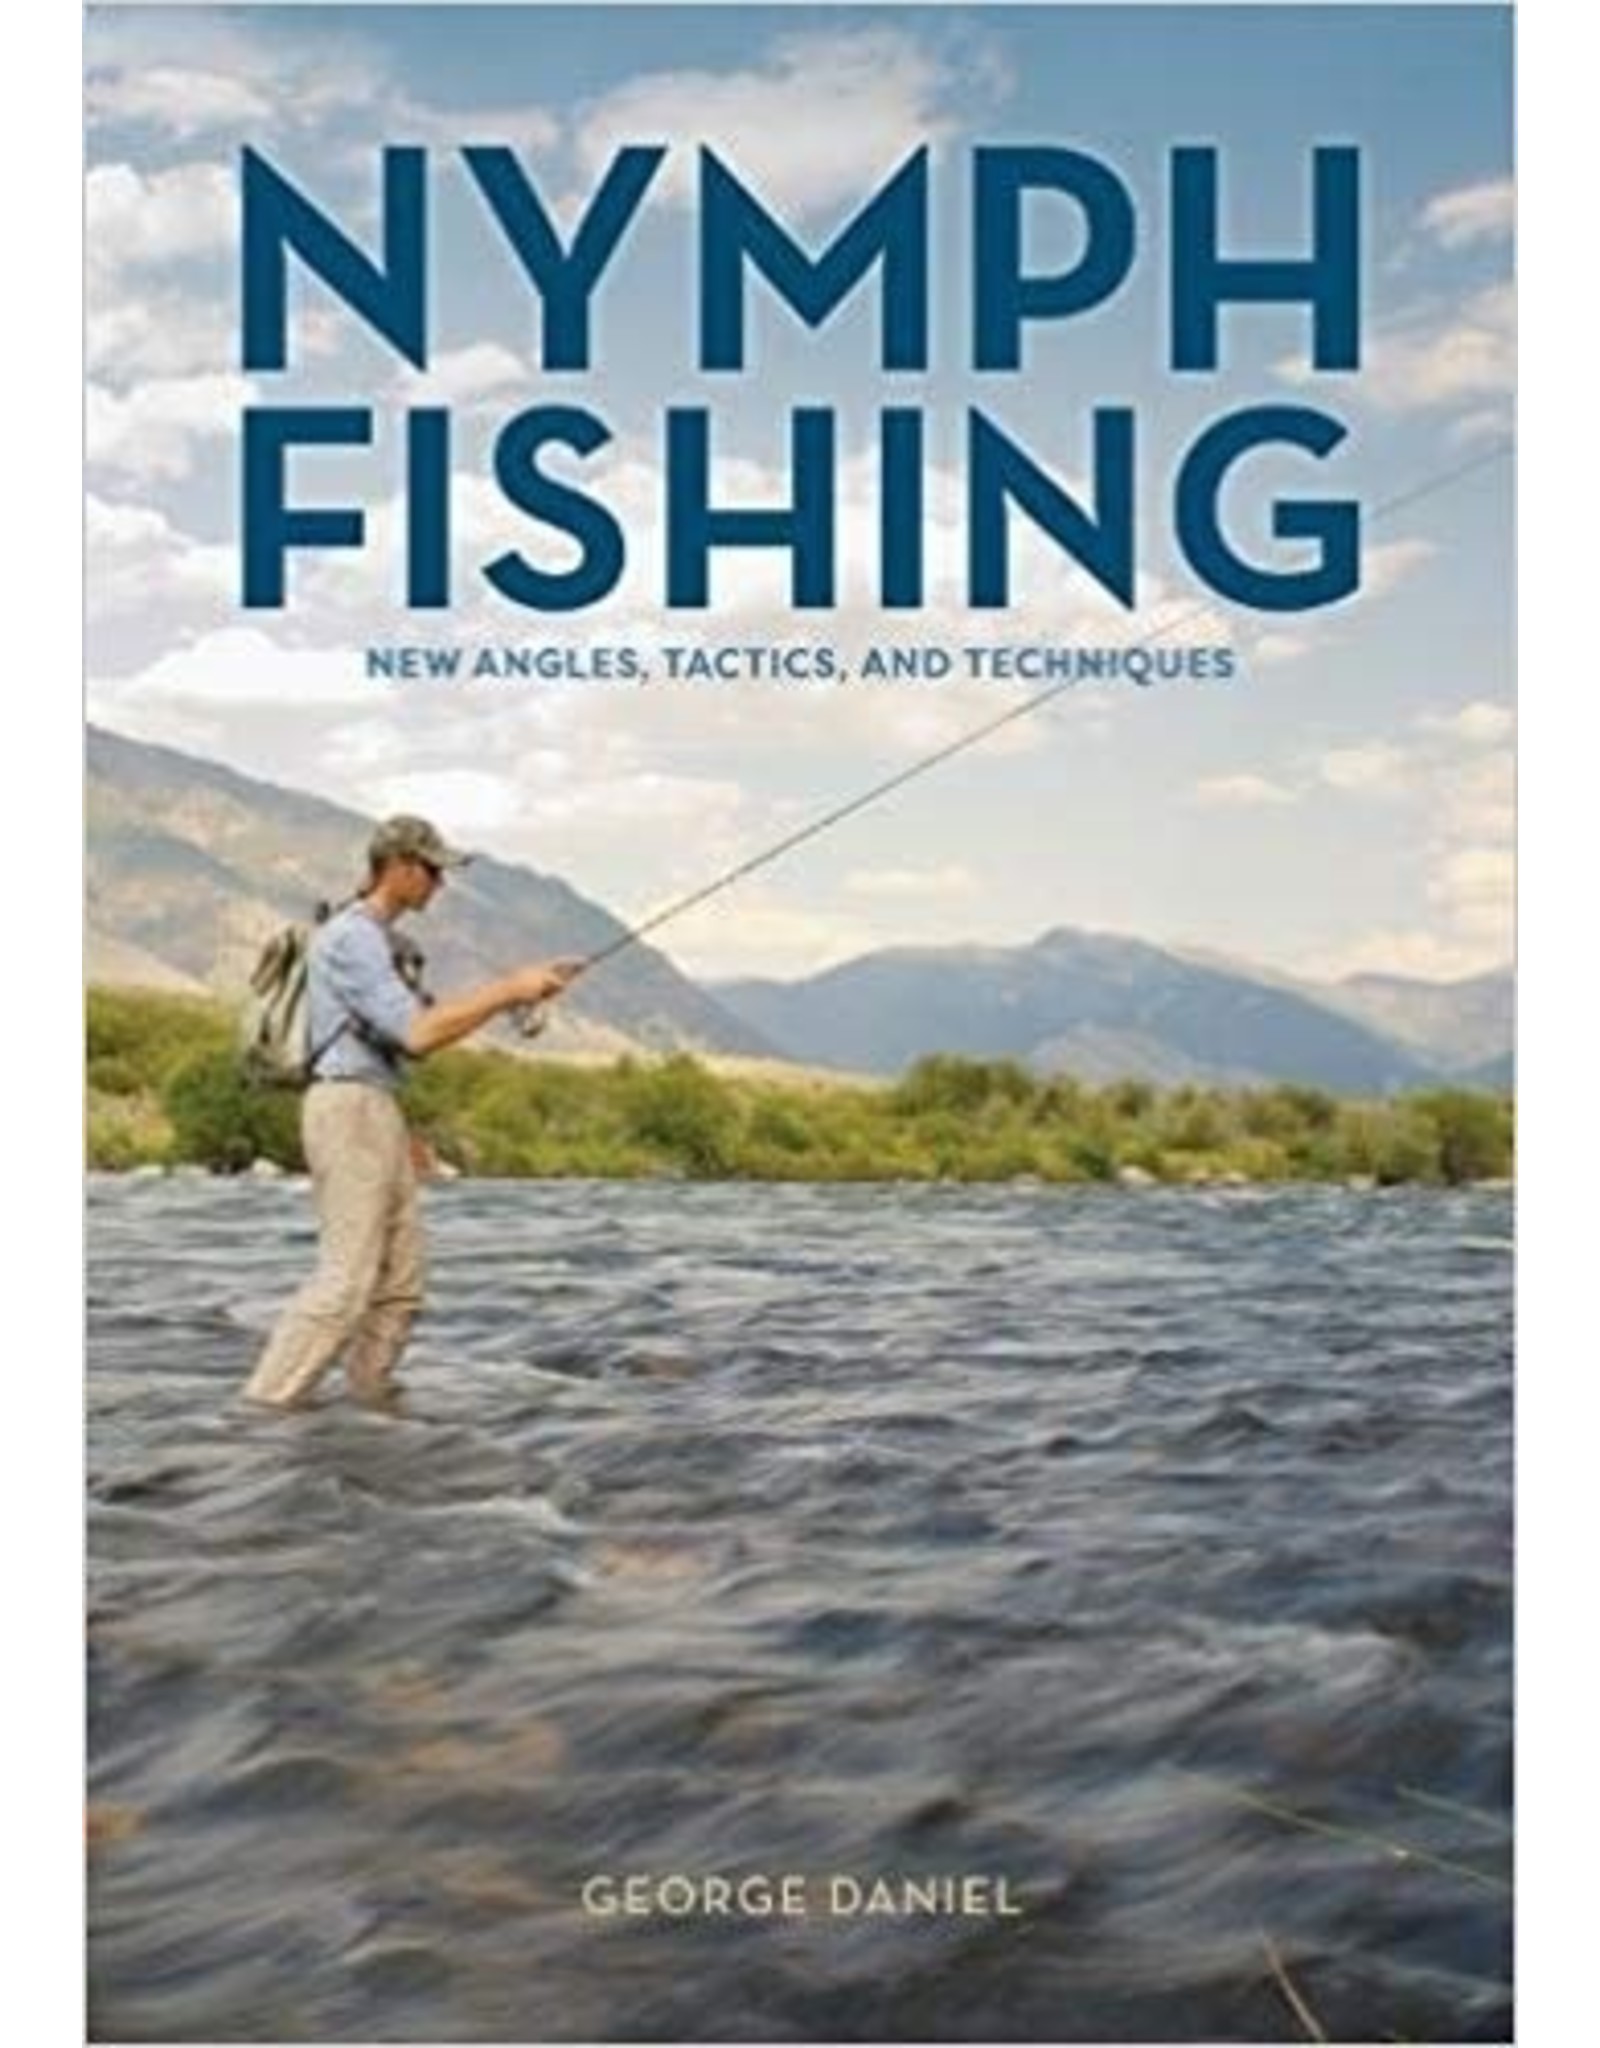 Books Nymph Fishing, New Angles, Tactics and Techniques by George Daniels